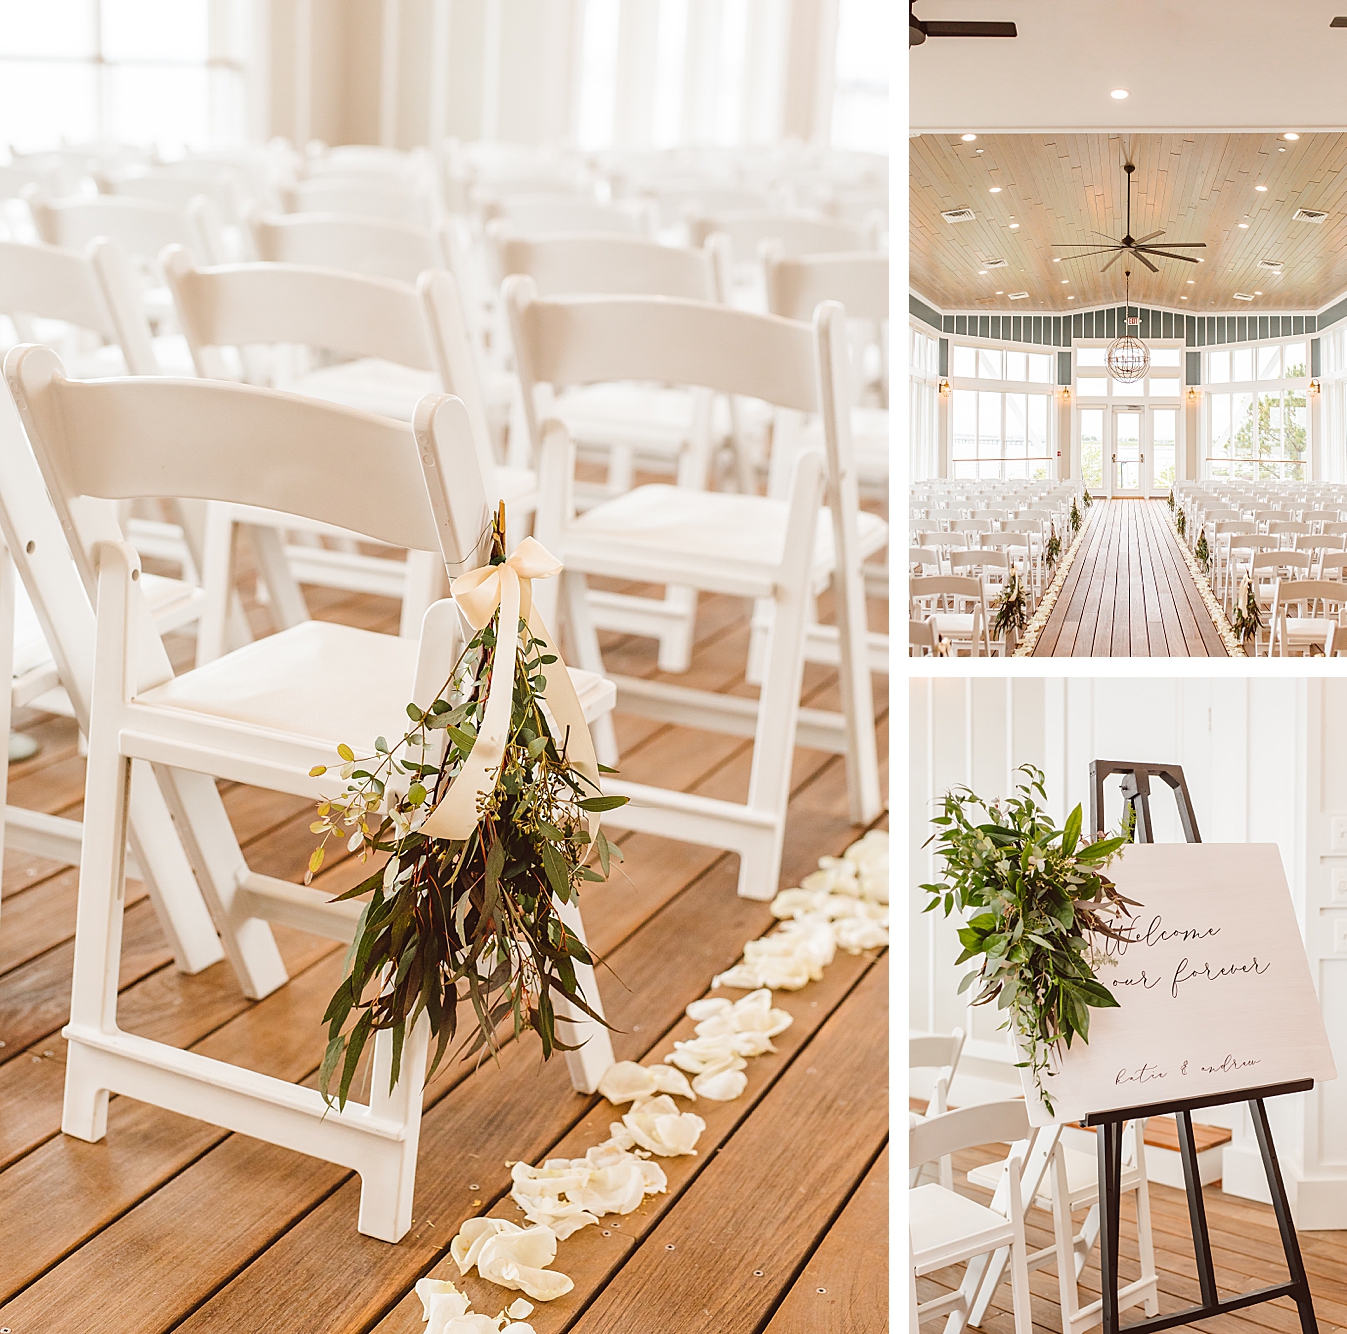 White chairs in ceremony space and aisle lined by white rose petals | Floor to ceiling windows in ceremony space at Chesapeake Bay Beach Club | Classic white welcome signed adorned by lush greenery | Brooke Michelle Photo